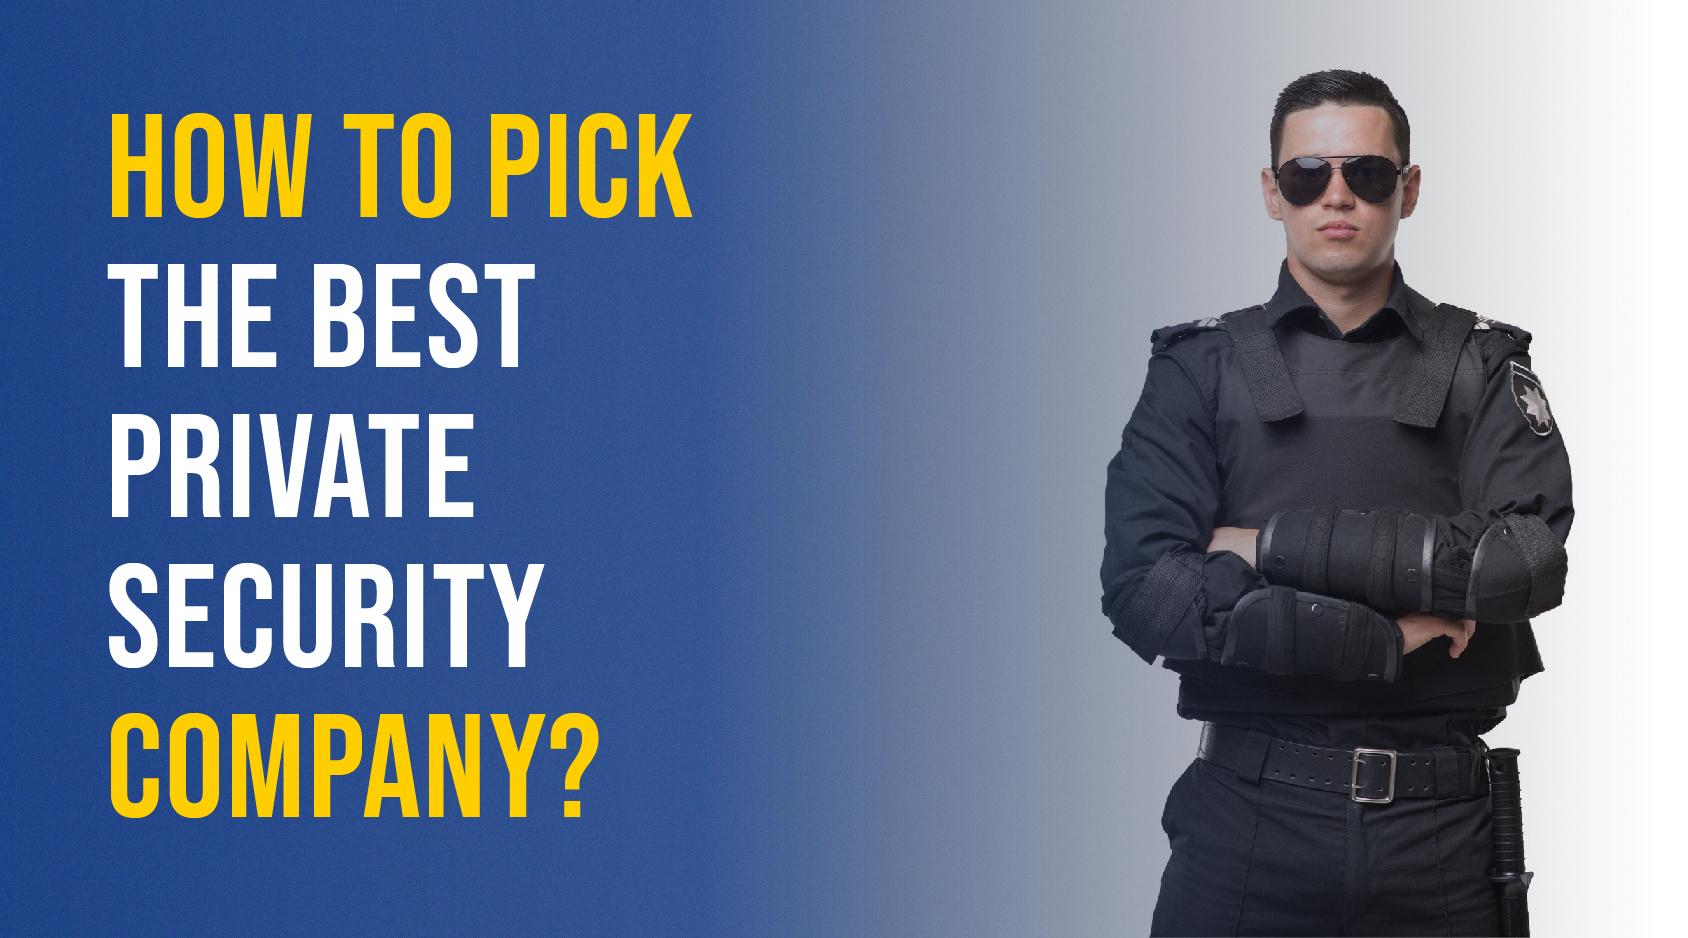 How to pick the best private security company